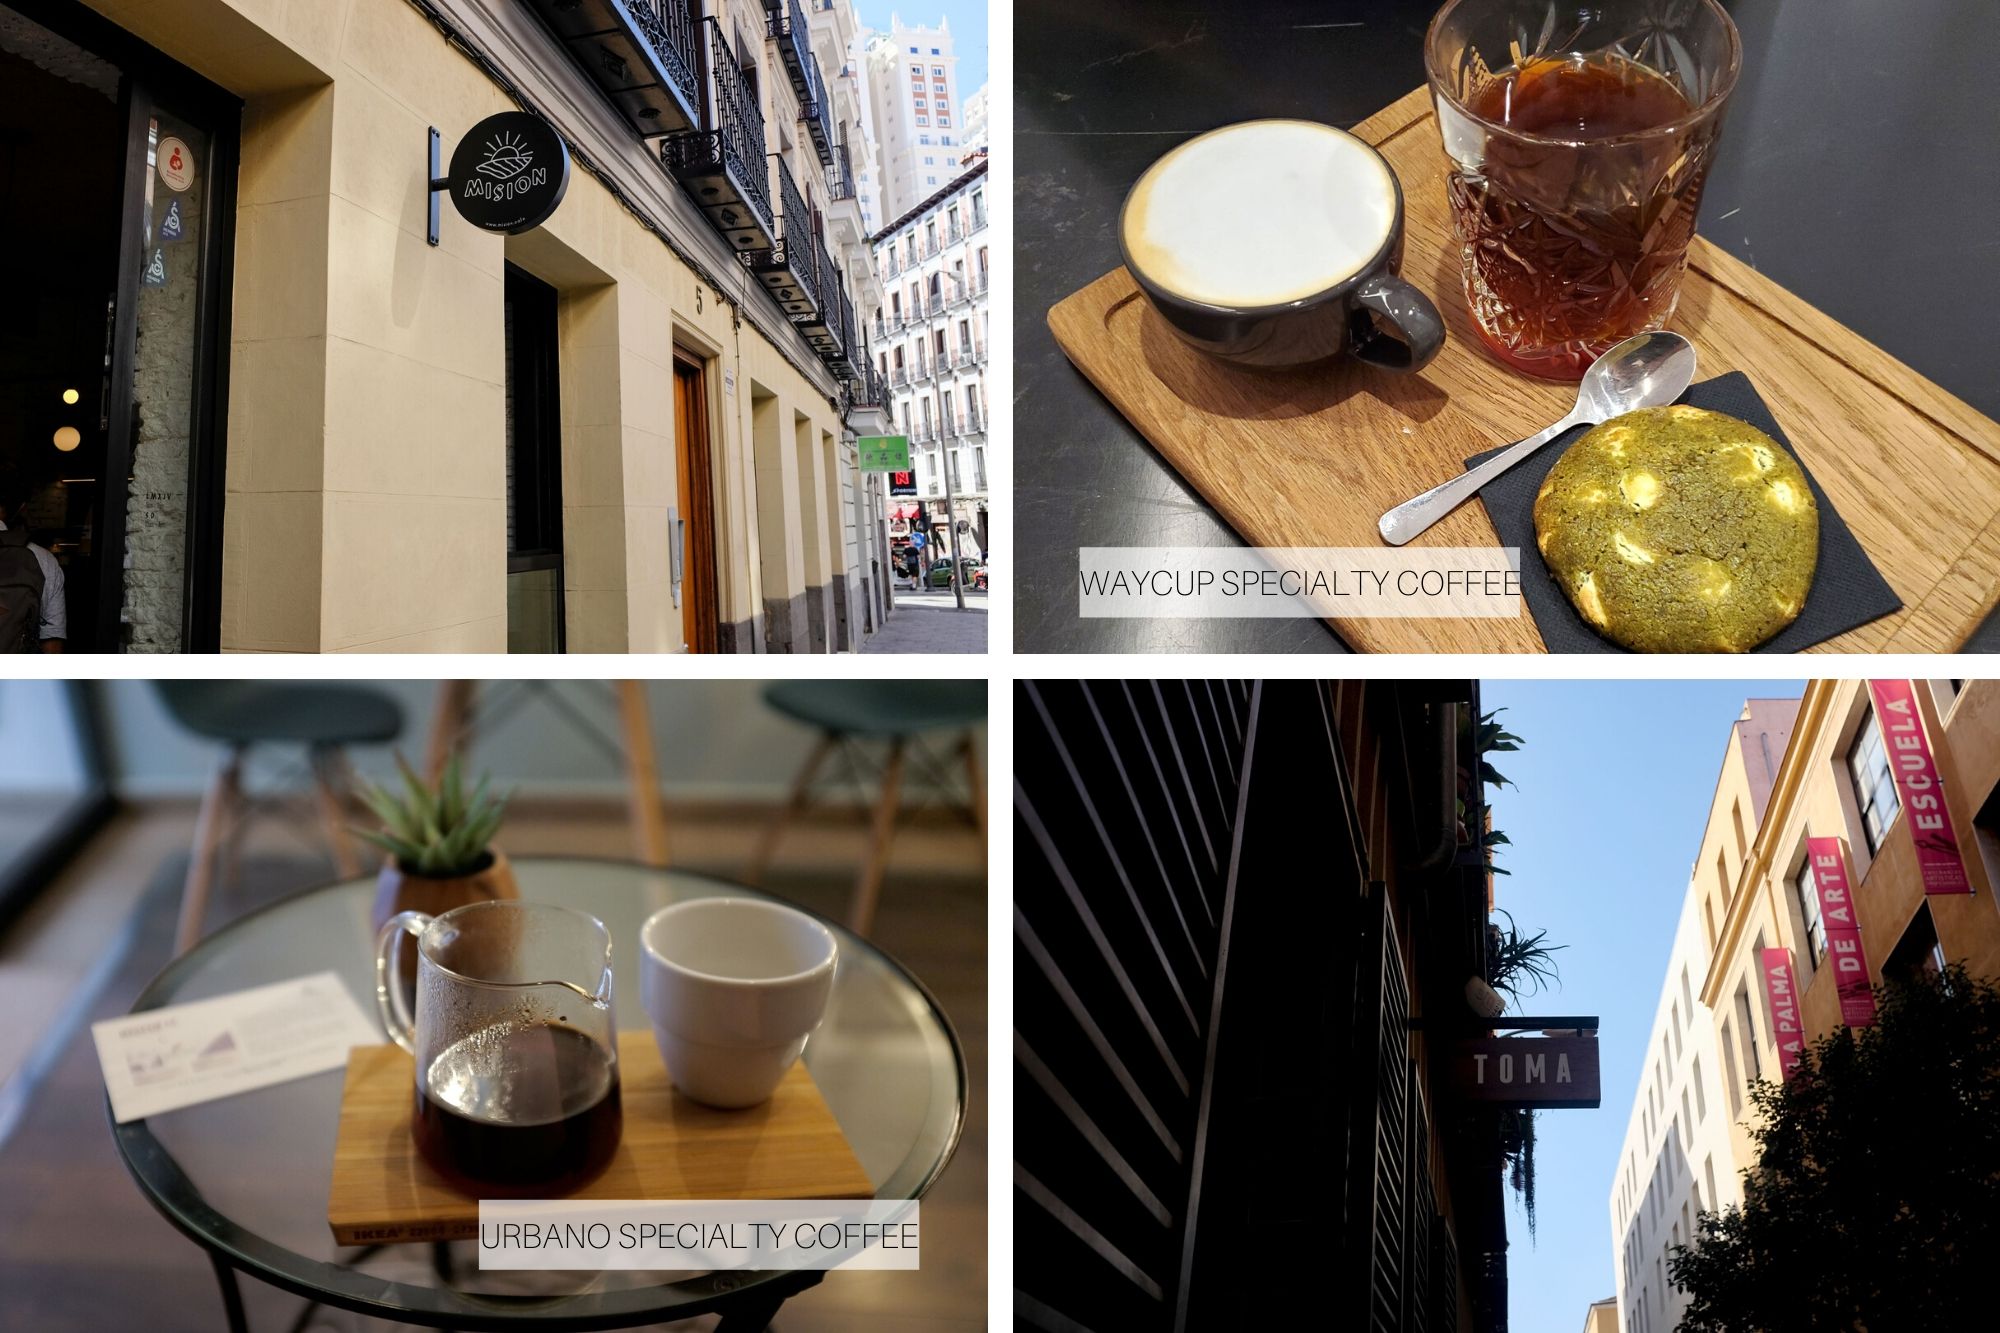 Collage: exterior of Mision and Toma; coffee from Waycup and Urbano